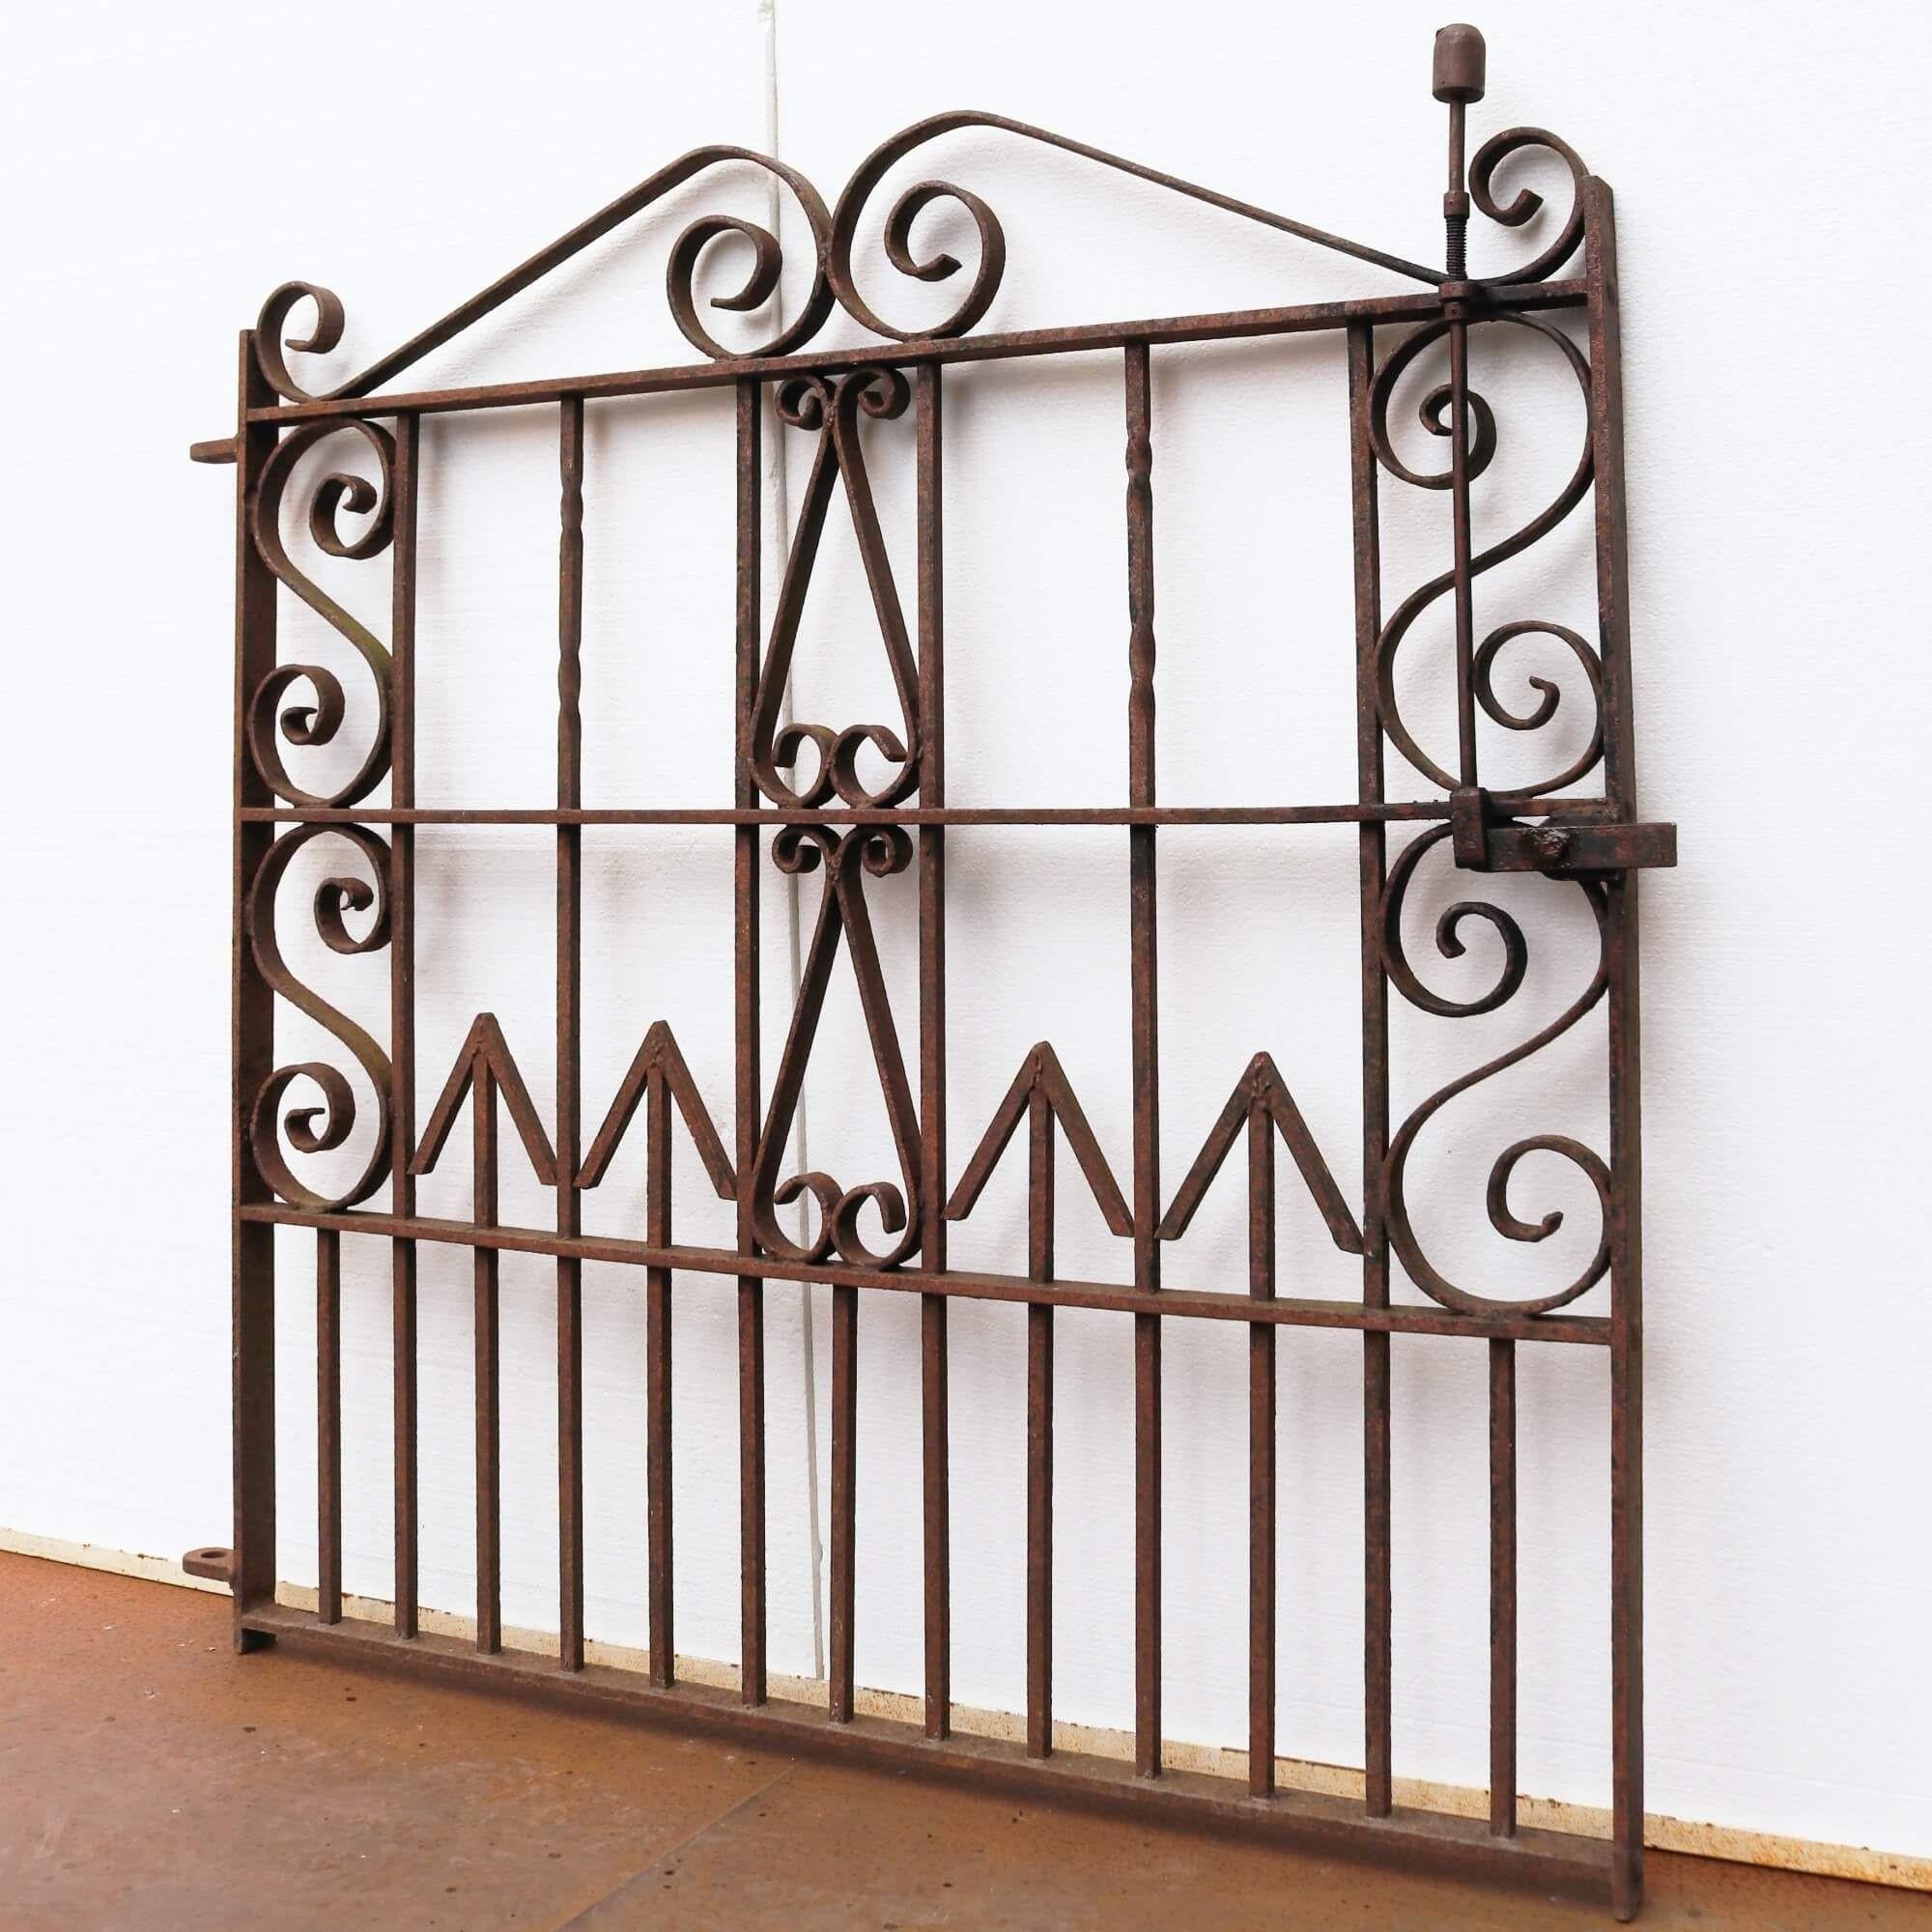 This Victorian garden gate has stood the test of time for more than 120 years. Made at the hand of a skilled 20th century blacksmith, it is ornately detailed with a range of scrollwork and arrow-shaped details that are a beautiful addition to an